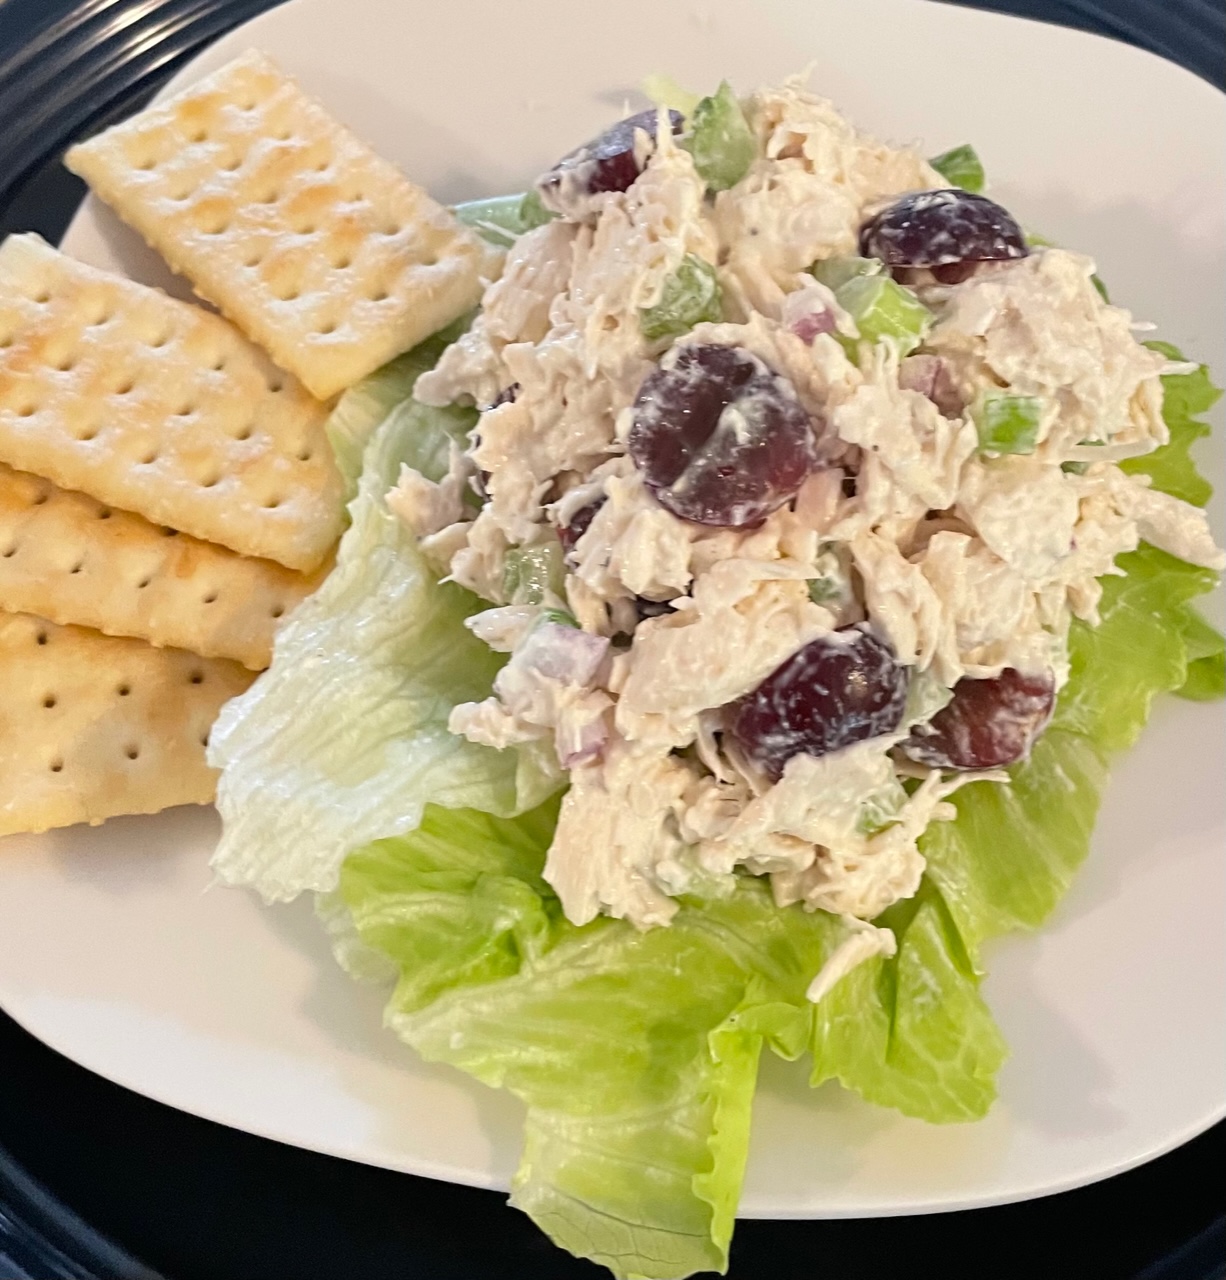 Chicken Salad With Grapes: Light, Easy, and Tasty!